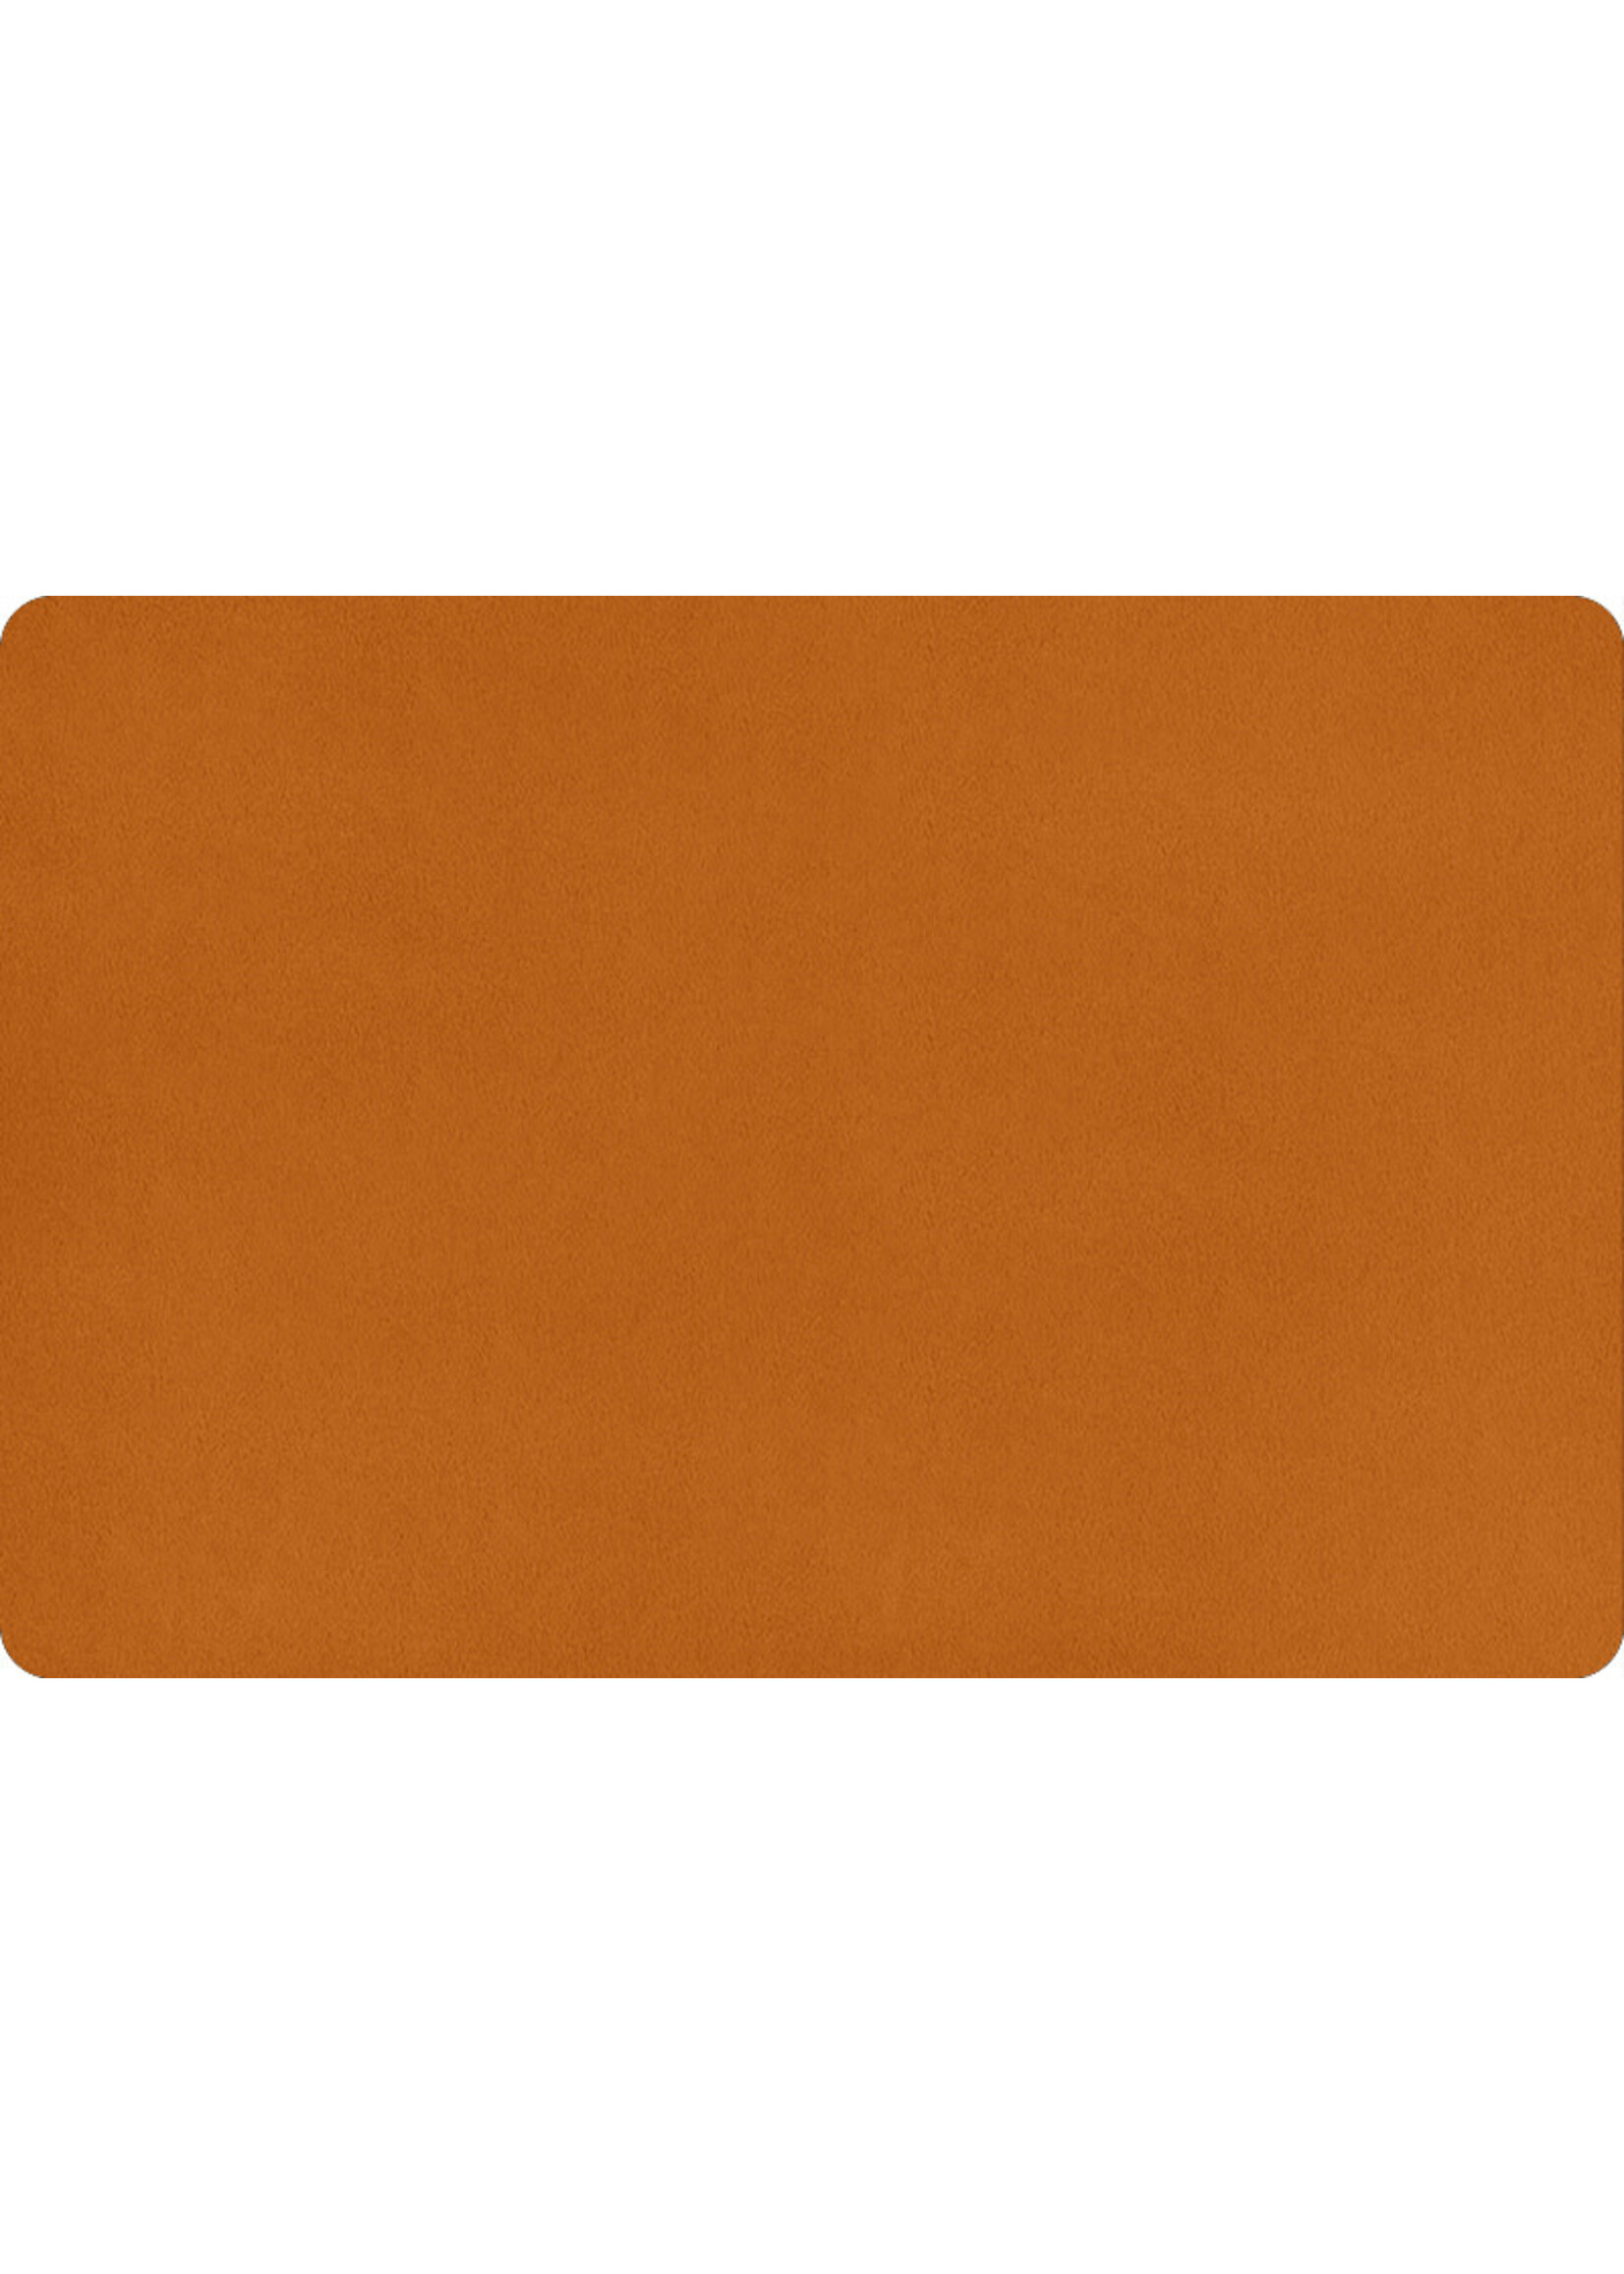 Shannon Fabrics Minky, Extra Wide Solid Cuddle3, 90" Ginger, (by the inch)